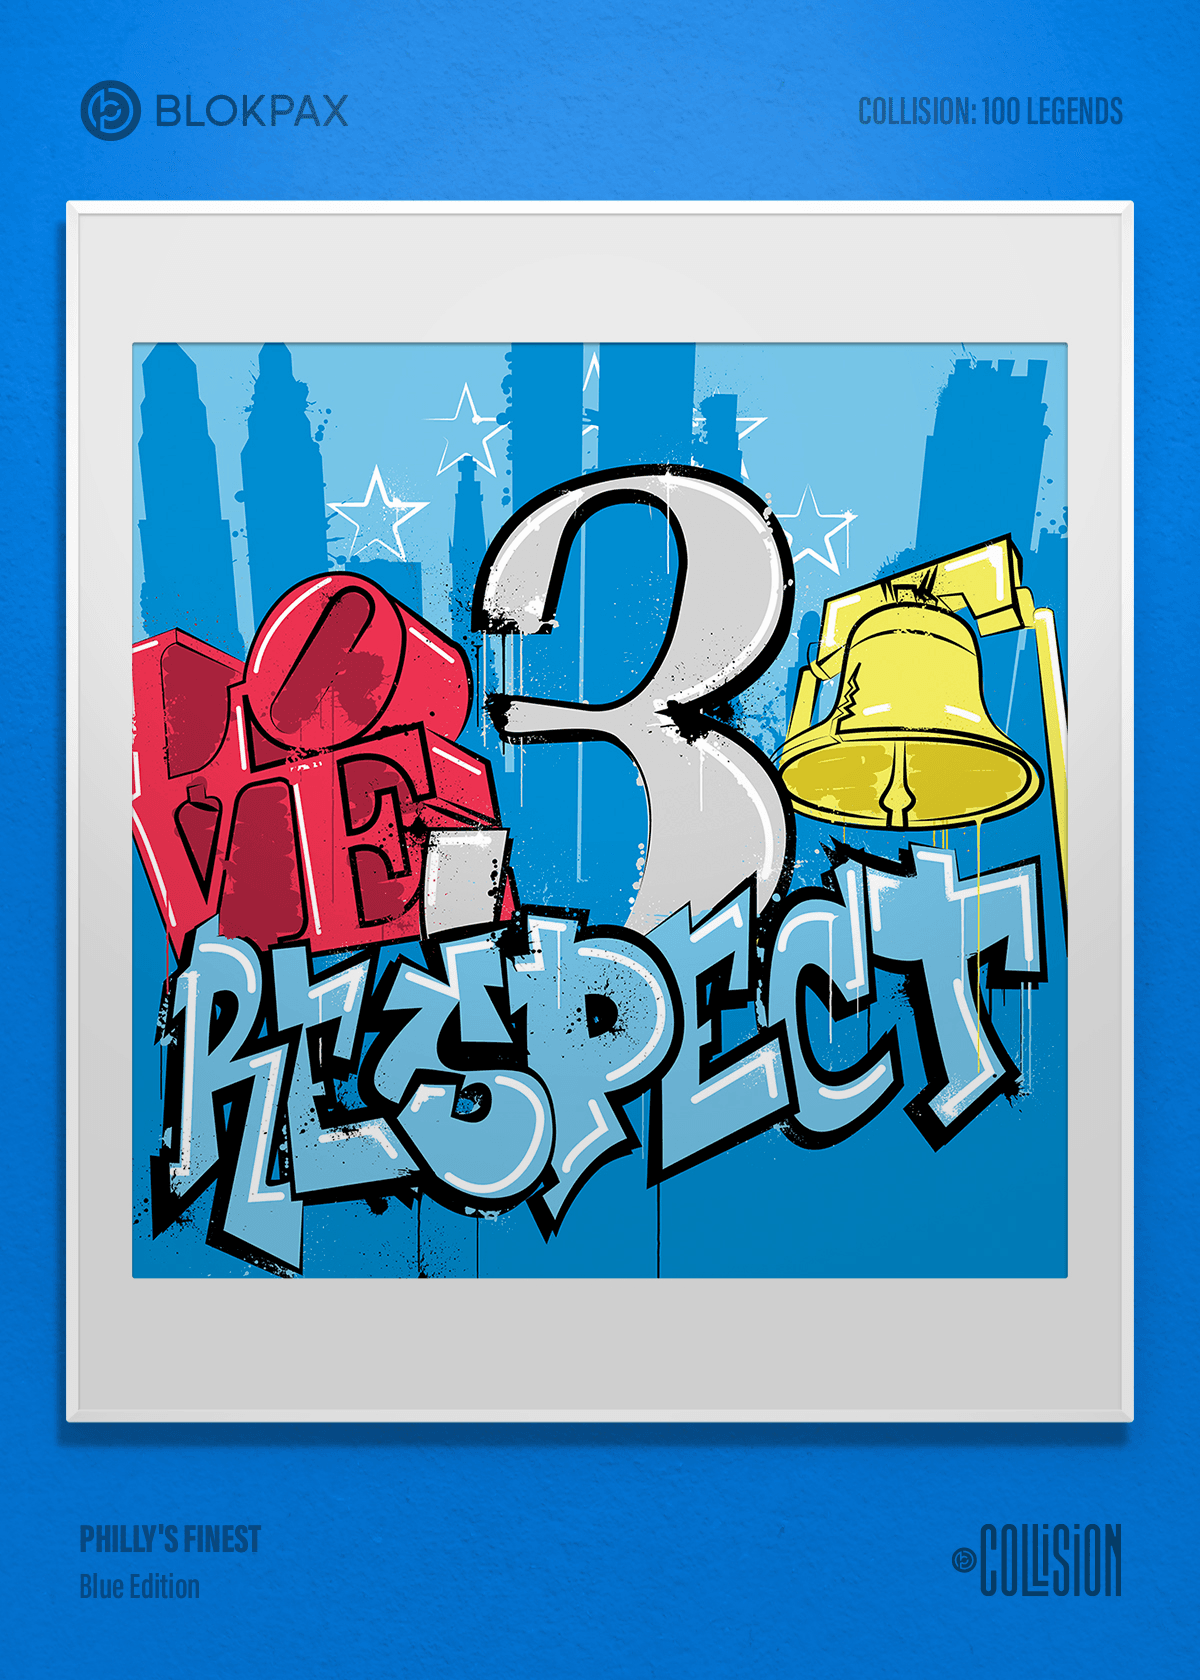 "THE ANSWER" Blue Edition: 1 of 150 (The "100 Legends" Tribute to Allen Iverson) - "Philly's Finest"